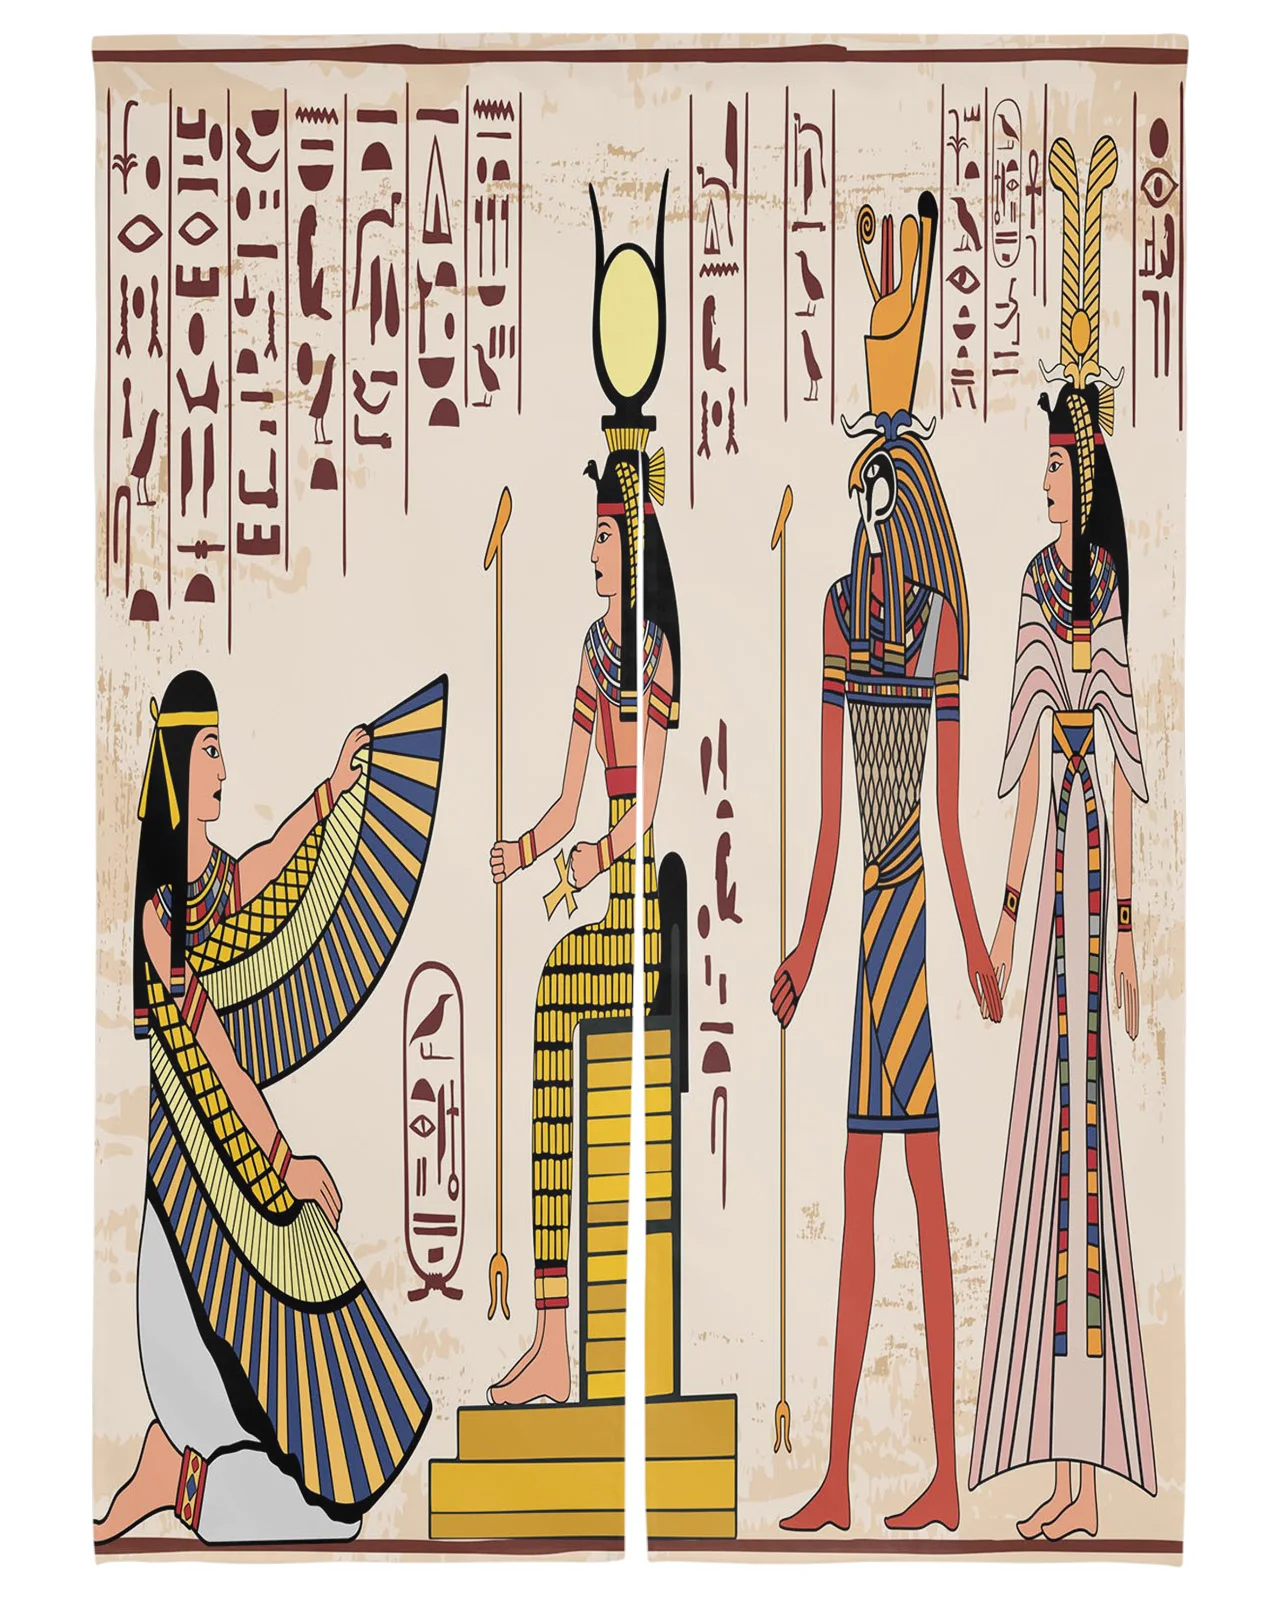 

Egyptian Mural Culture Ancient Art Door Curtain Japanese Partition Kitchen Decorative Drapes Entrance Hanging Half-curtain